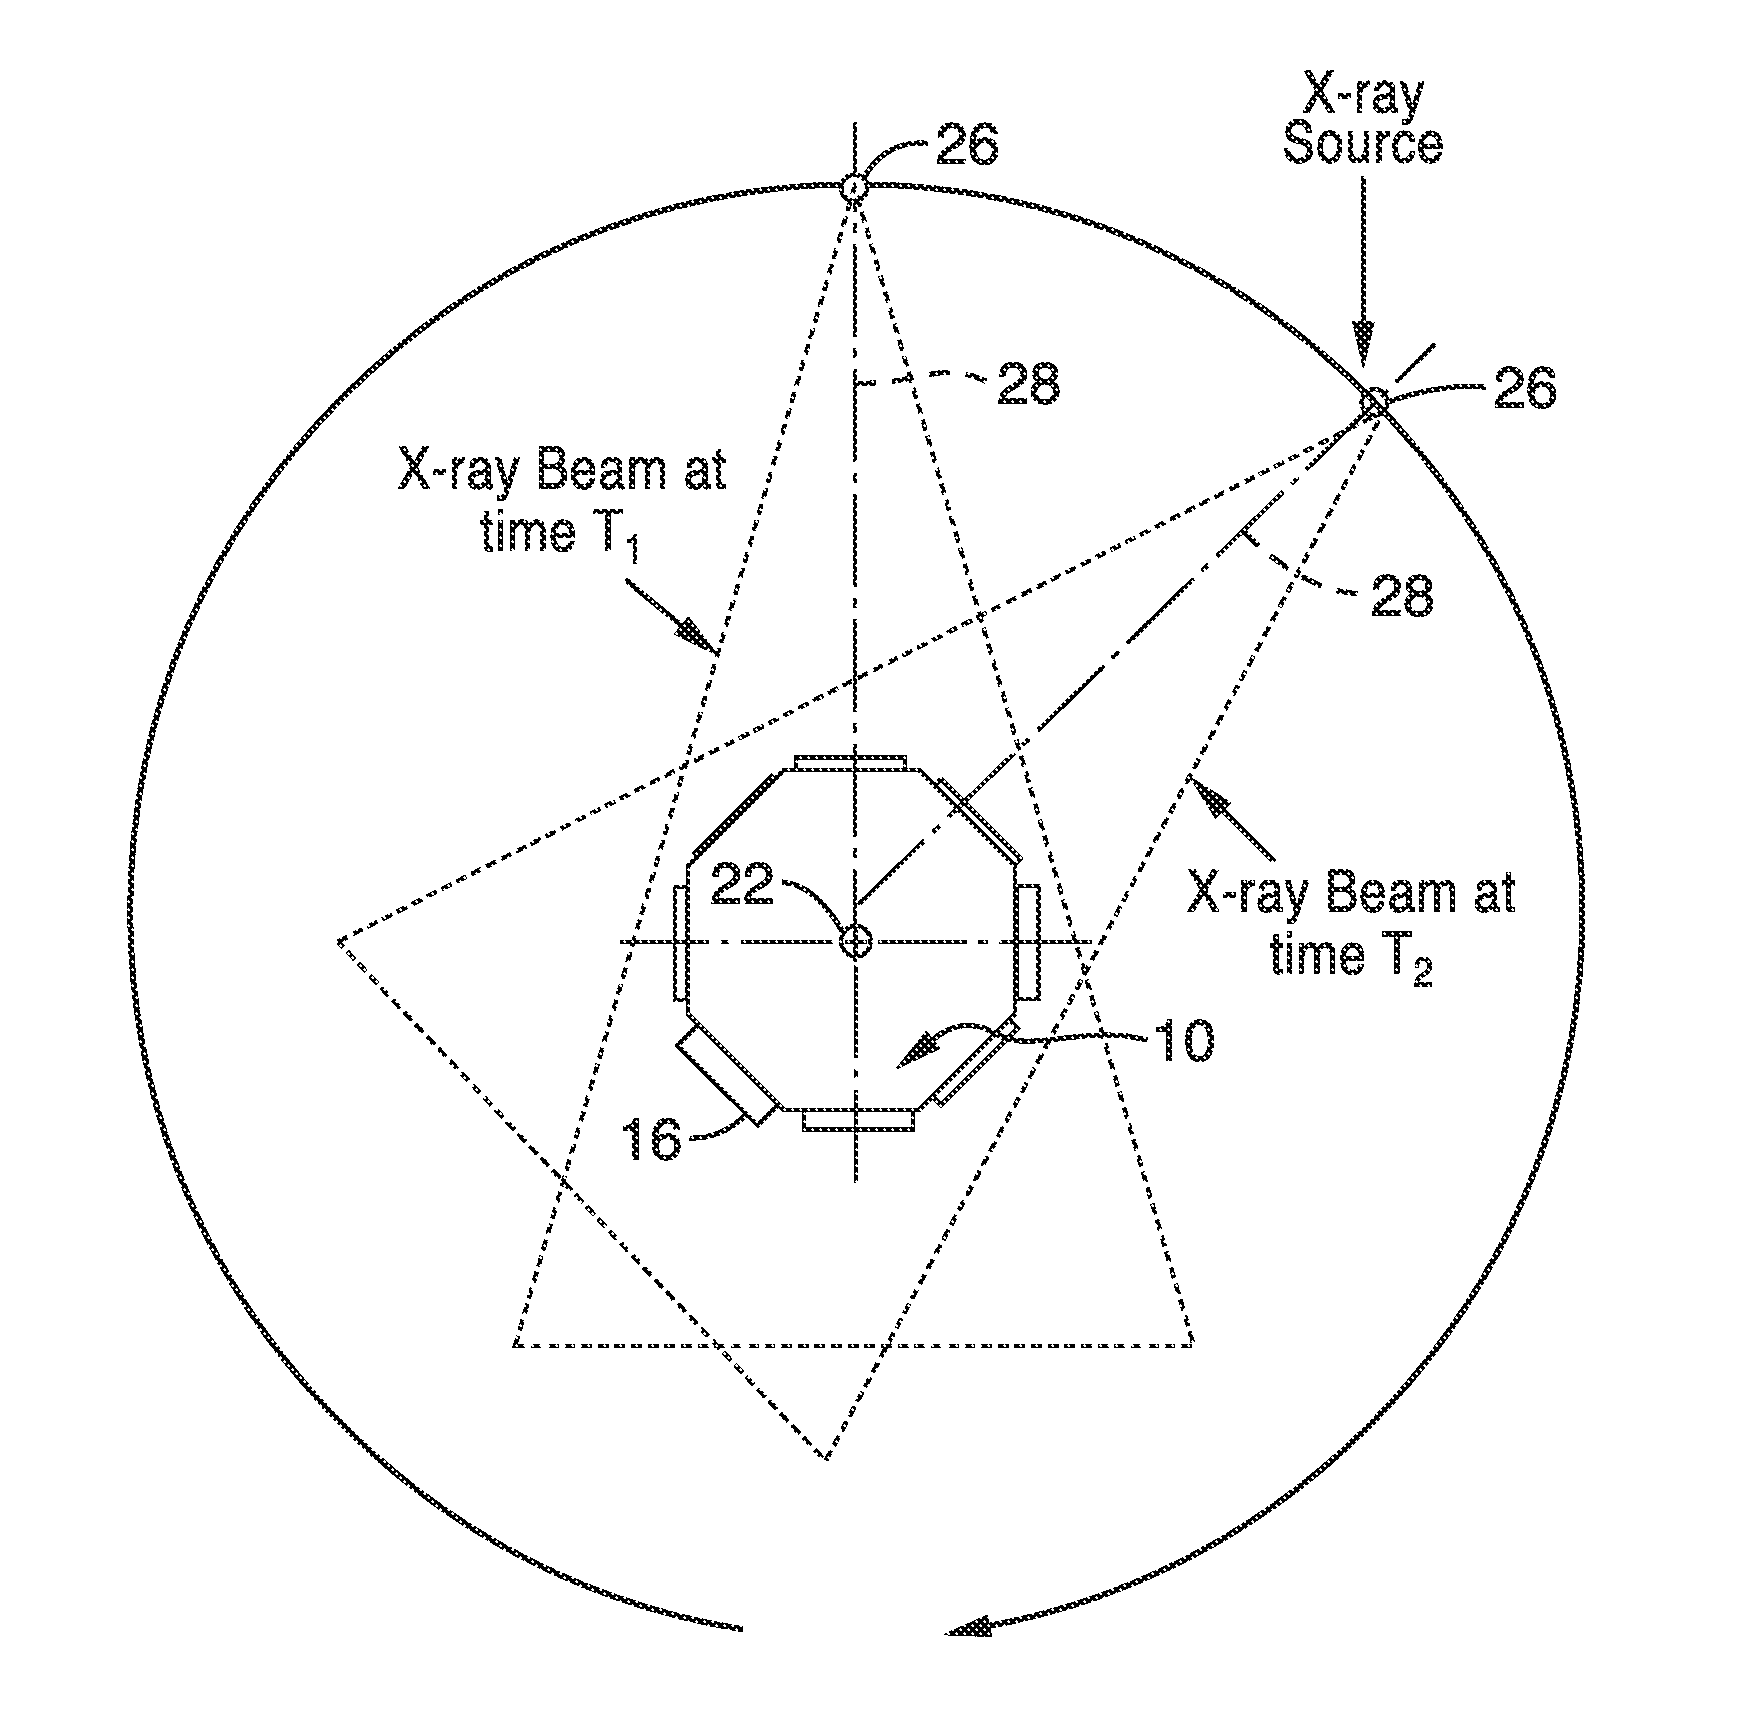 Apparatus and methods for determination of the half value layer of X-ray beams